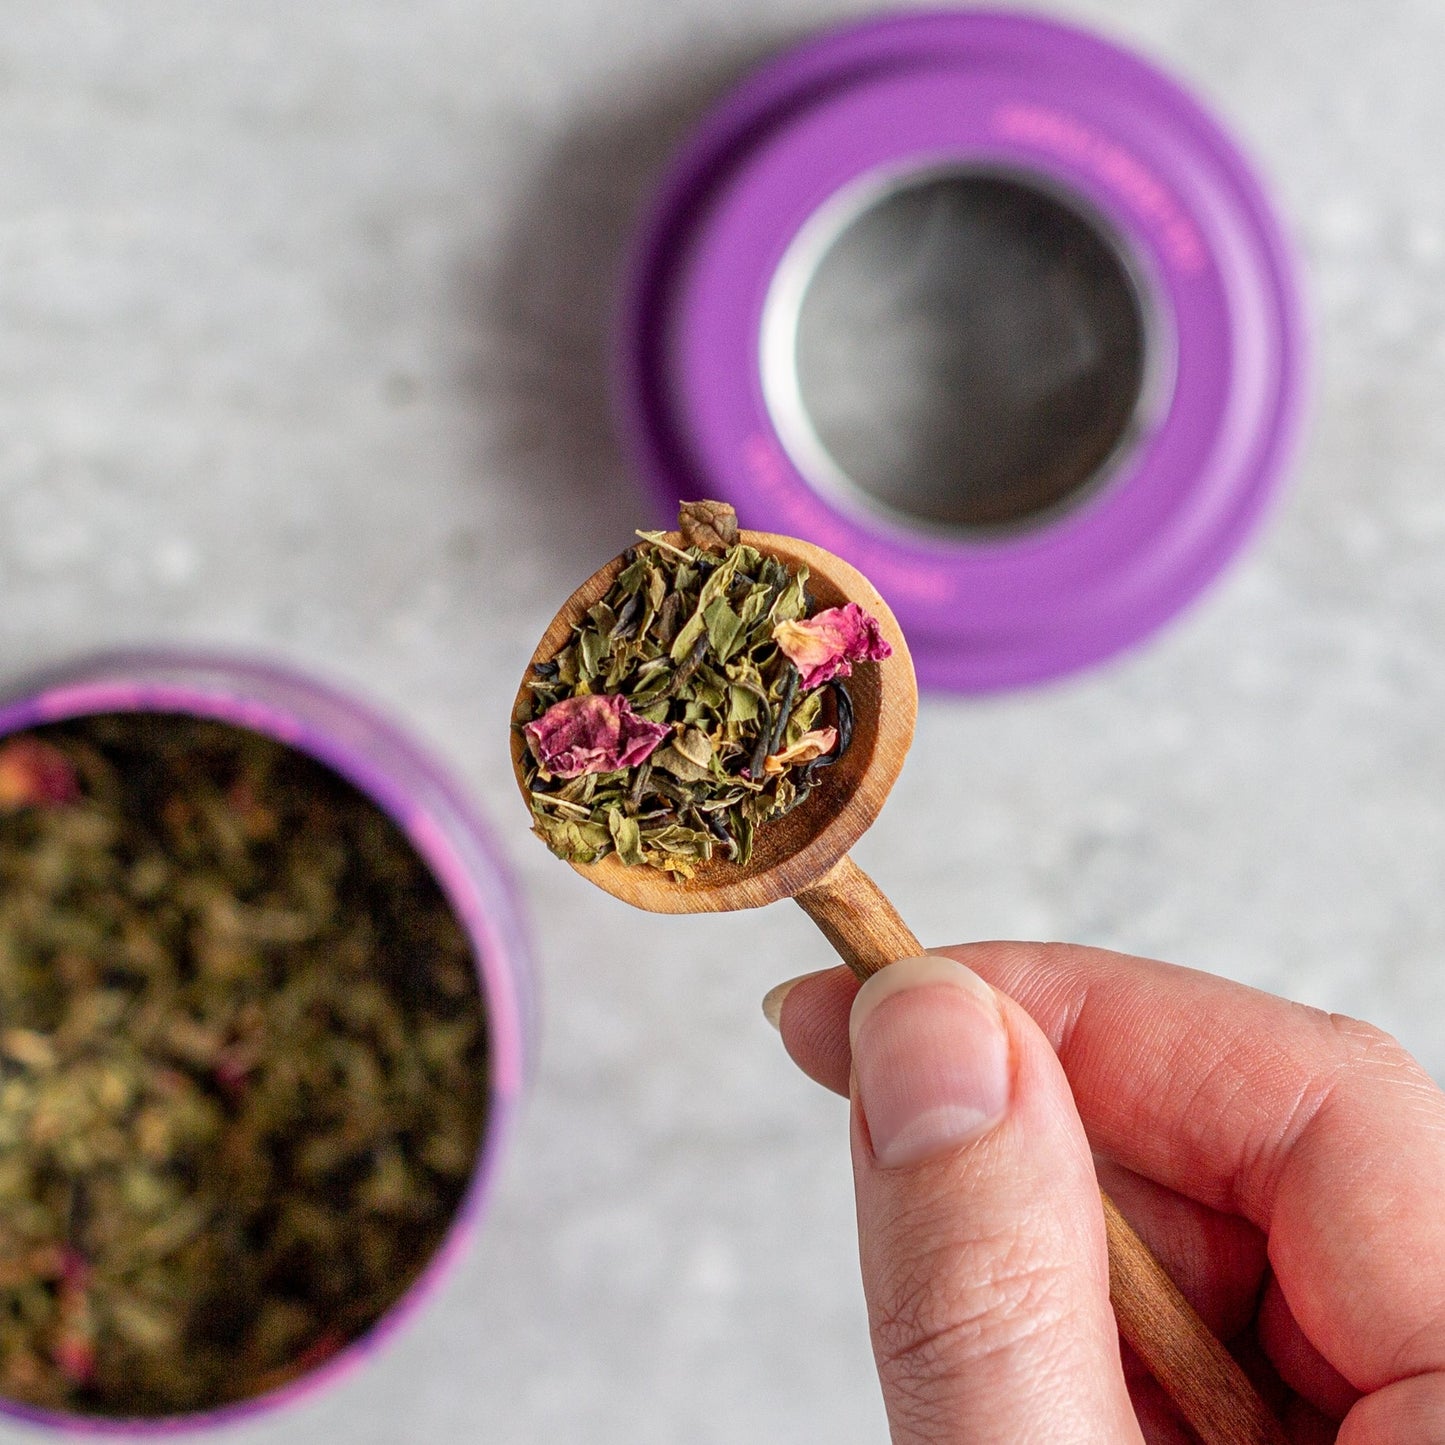 Justea - Purple Mint Tea Tin with Spoon - The GV Collective